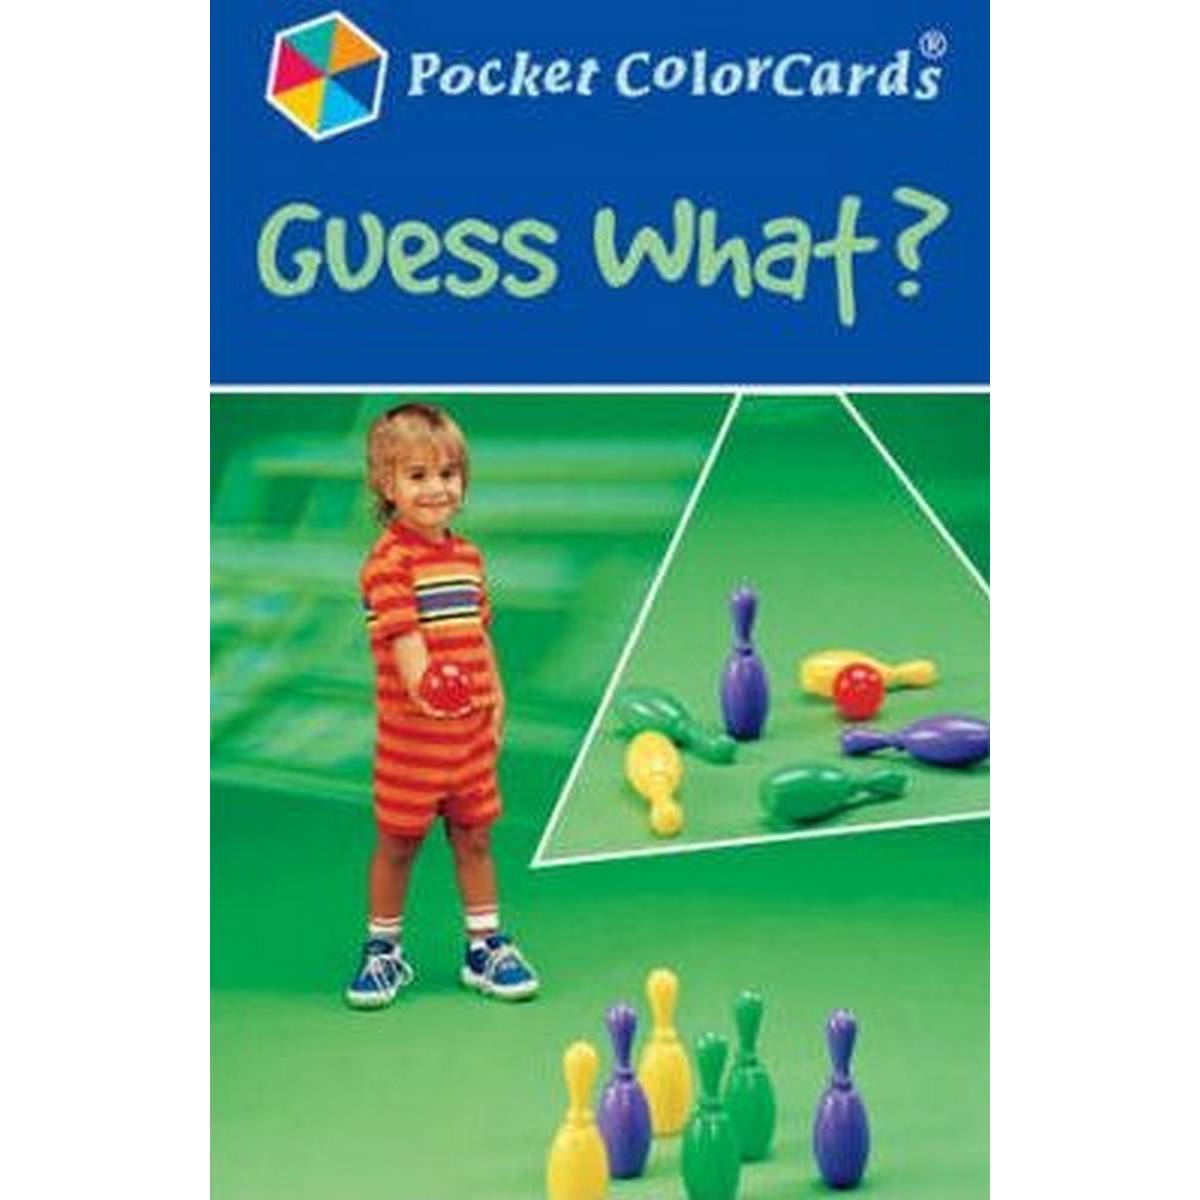 Pocket ColorCards: Guess What?